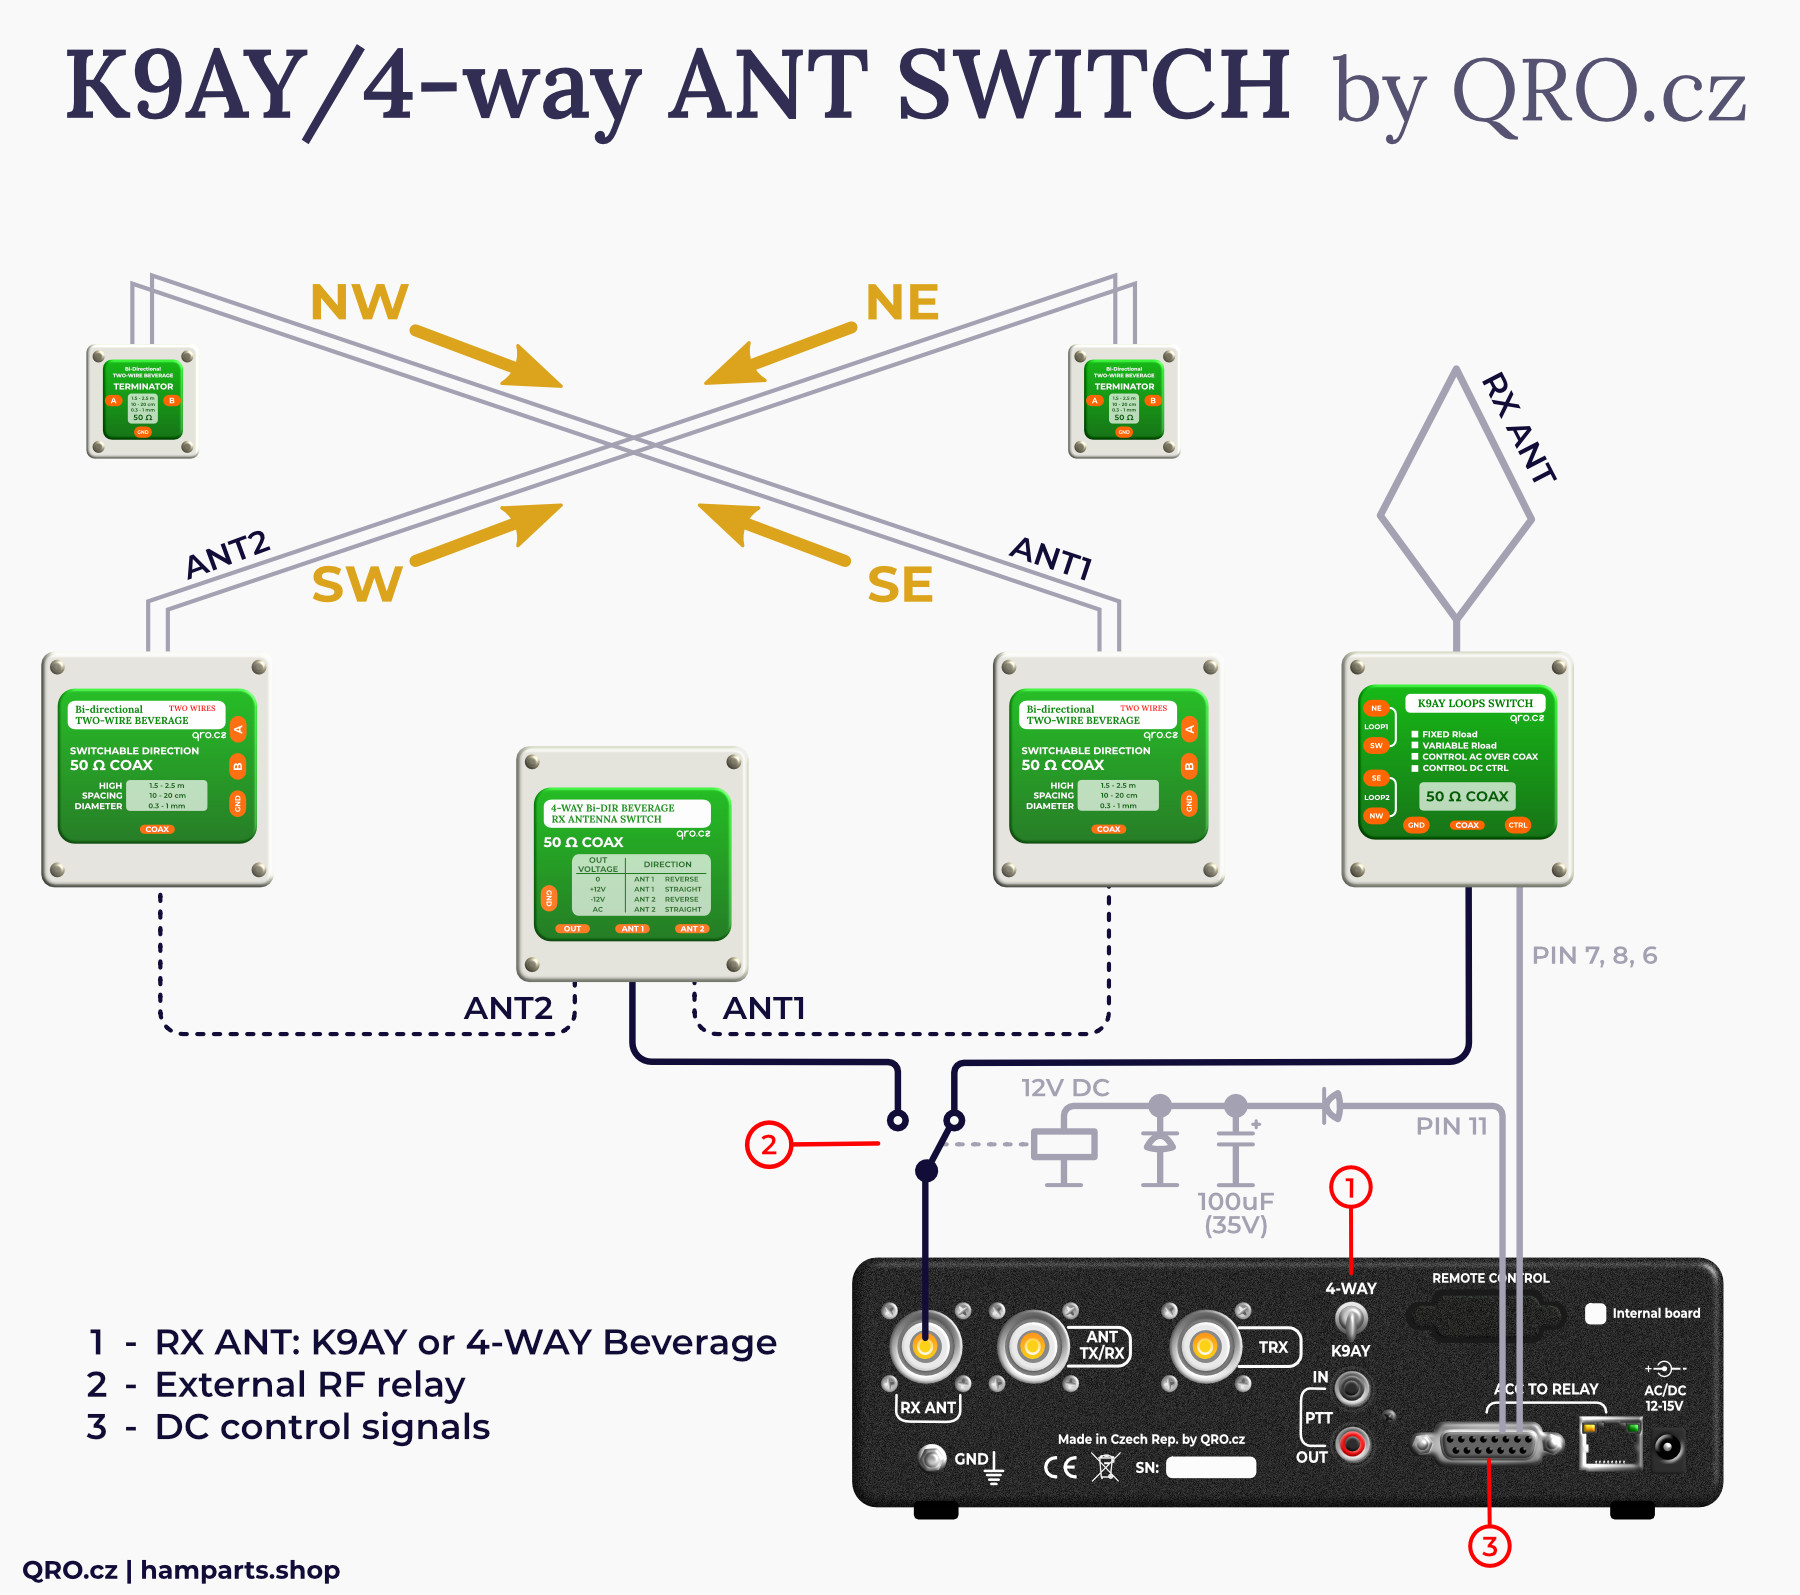 4-way system with k9ay simply loops switch antenna by qro.cz hamparts.shop